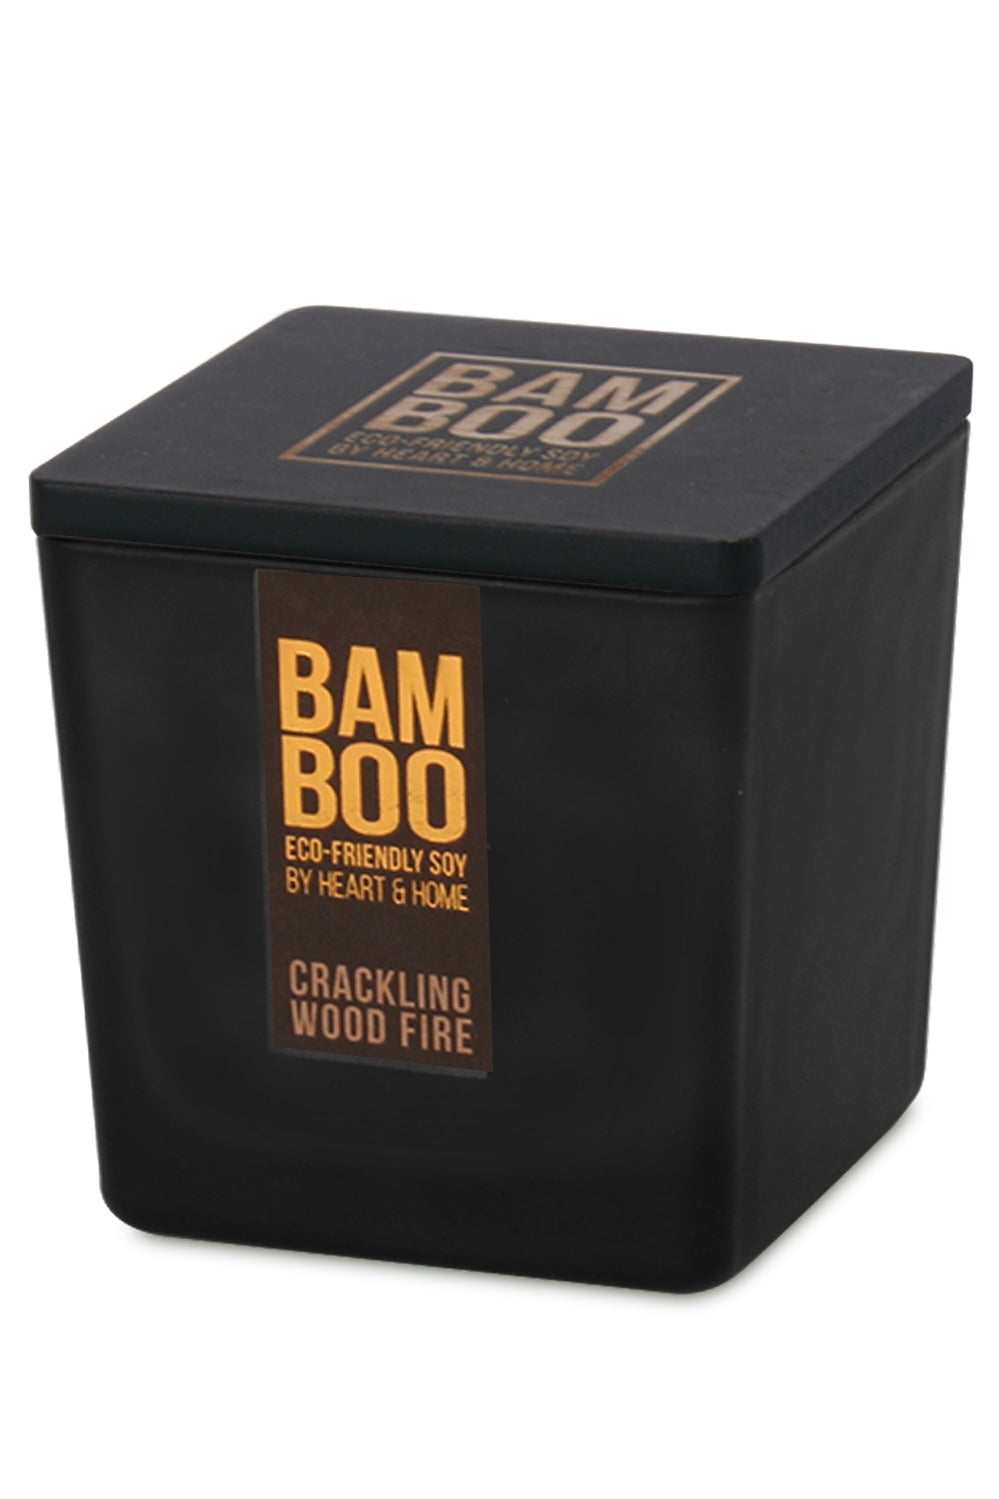 40% OFF SALE Large Crackling Wood Fire Bamboo Eco-Friendly Soy Candle